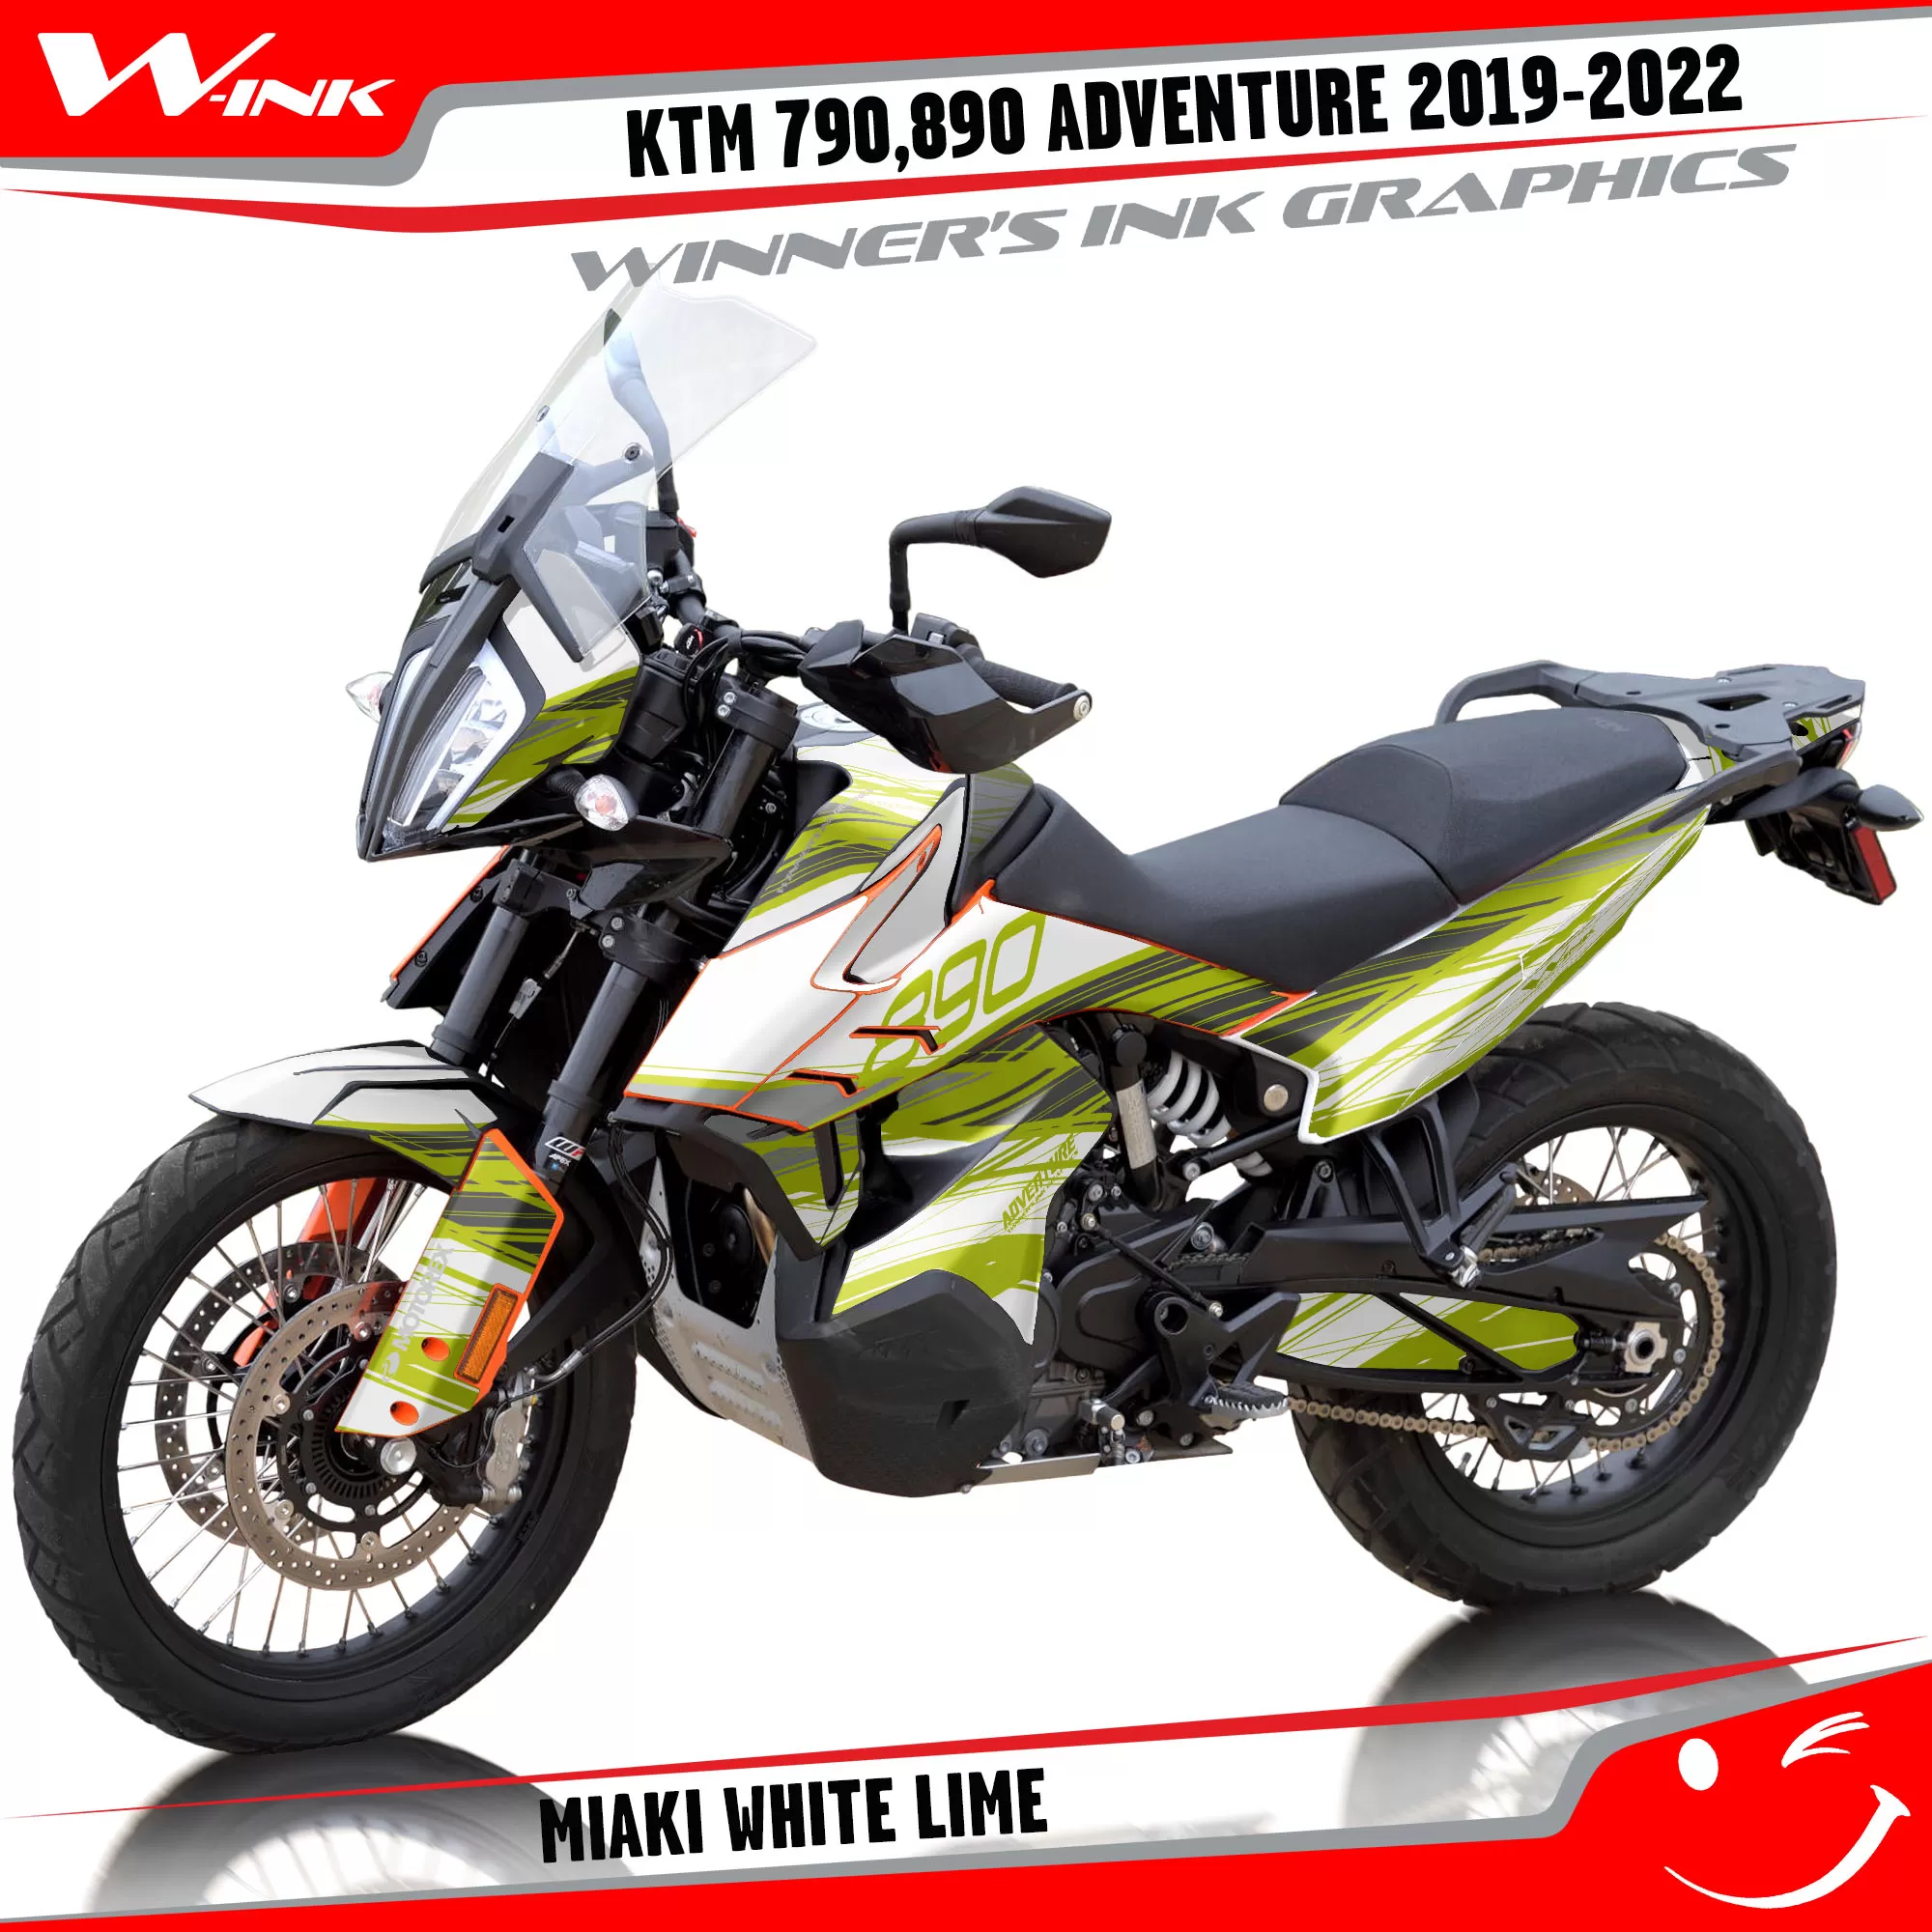 Adventure-790-890-2019-2020-2021-2022-graphics-kit-and-decals-with-designs-Miaki-White-Lime